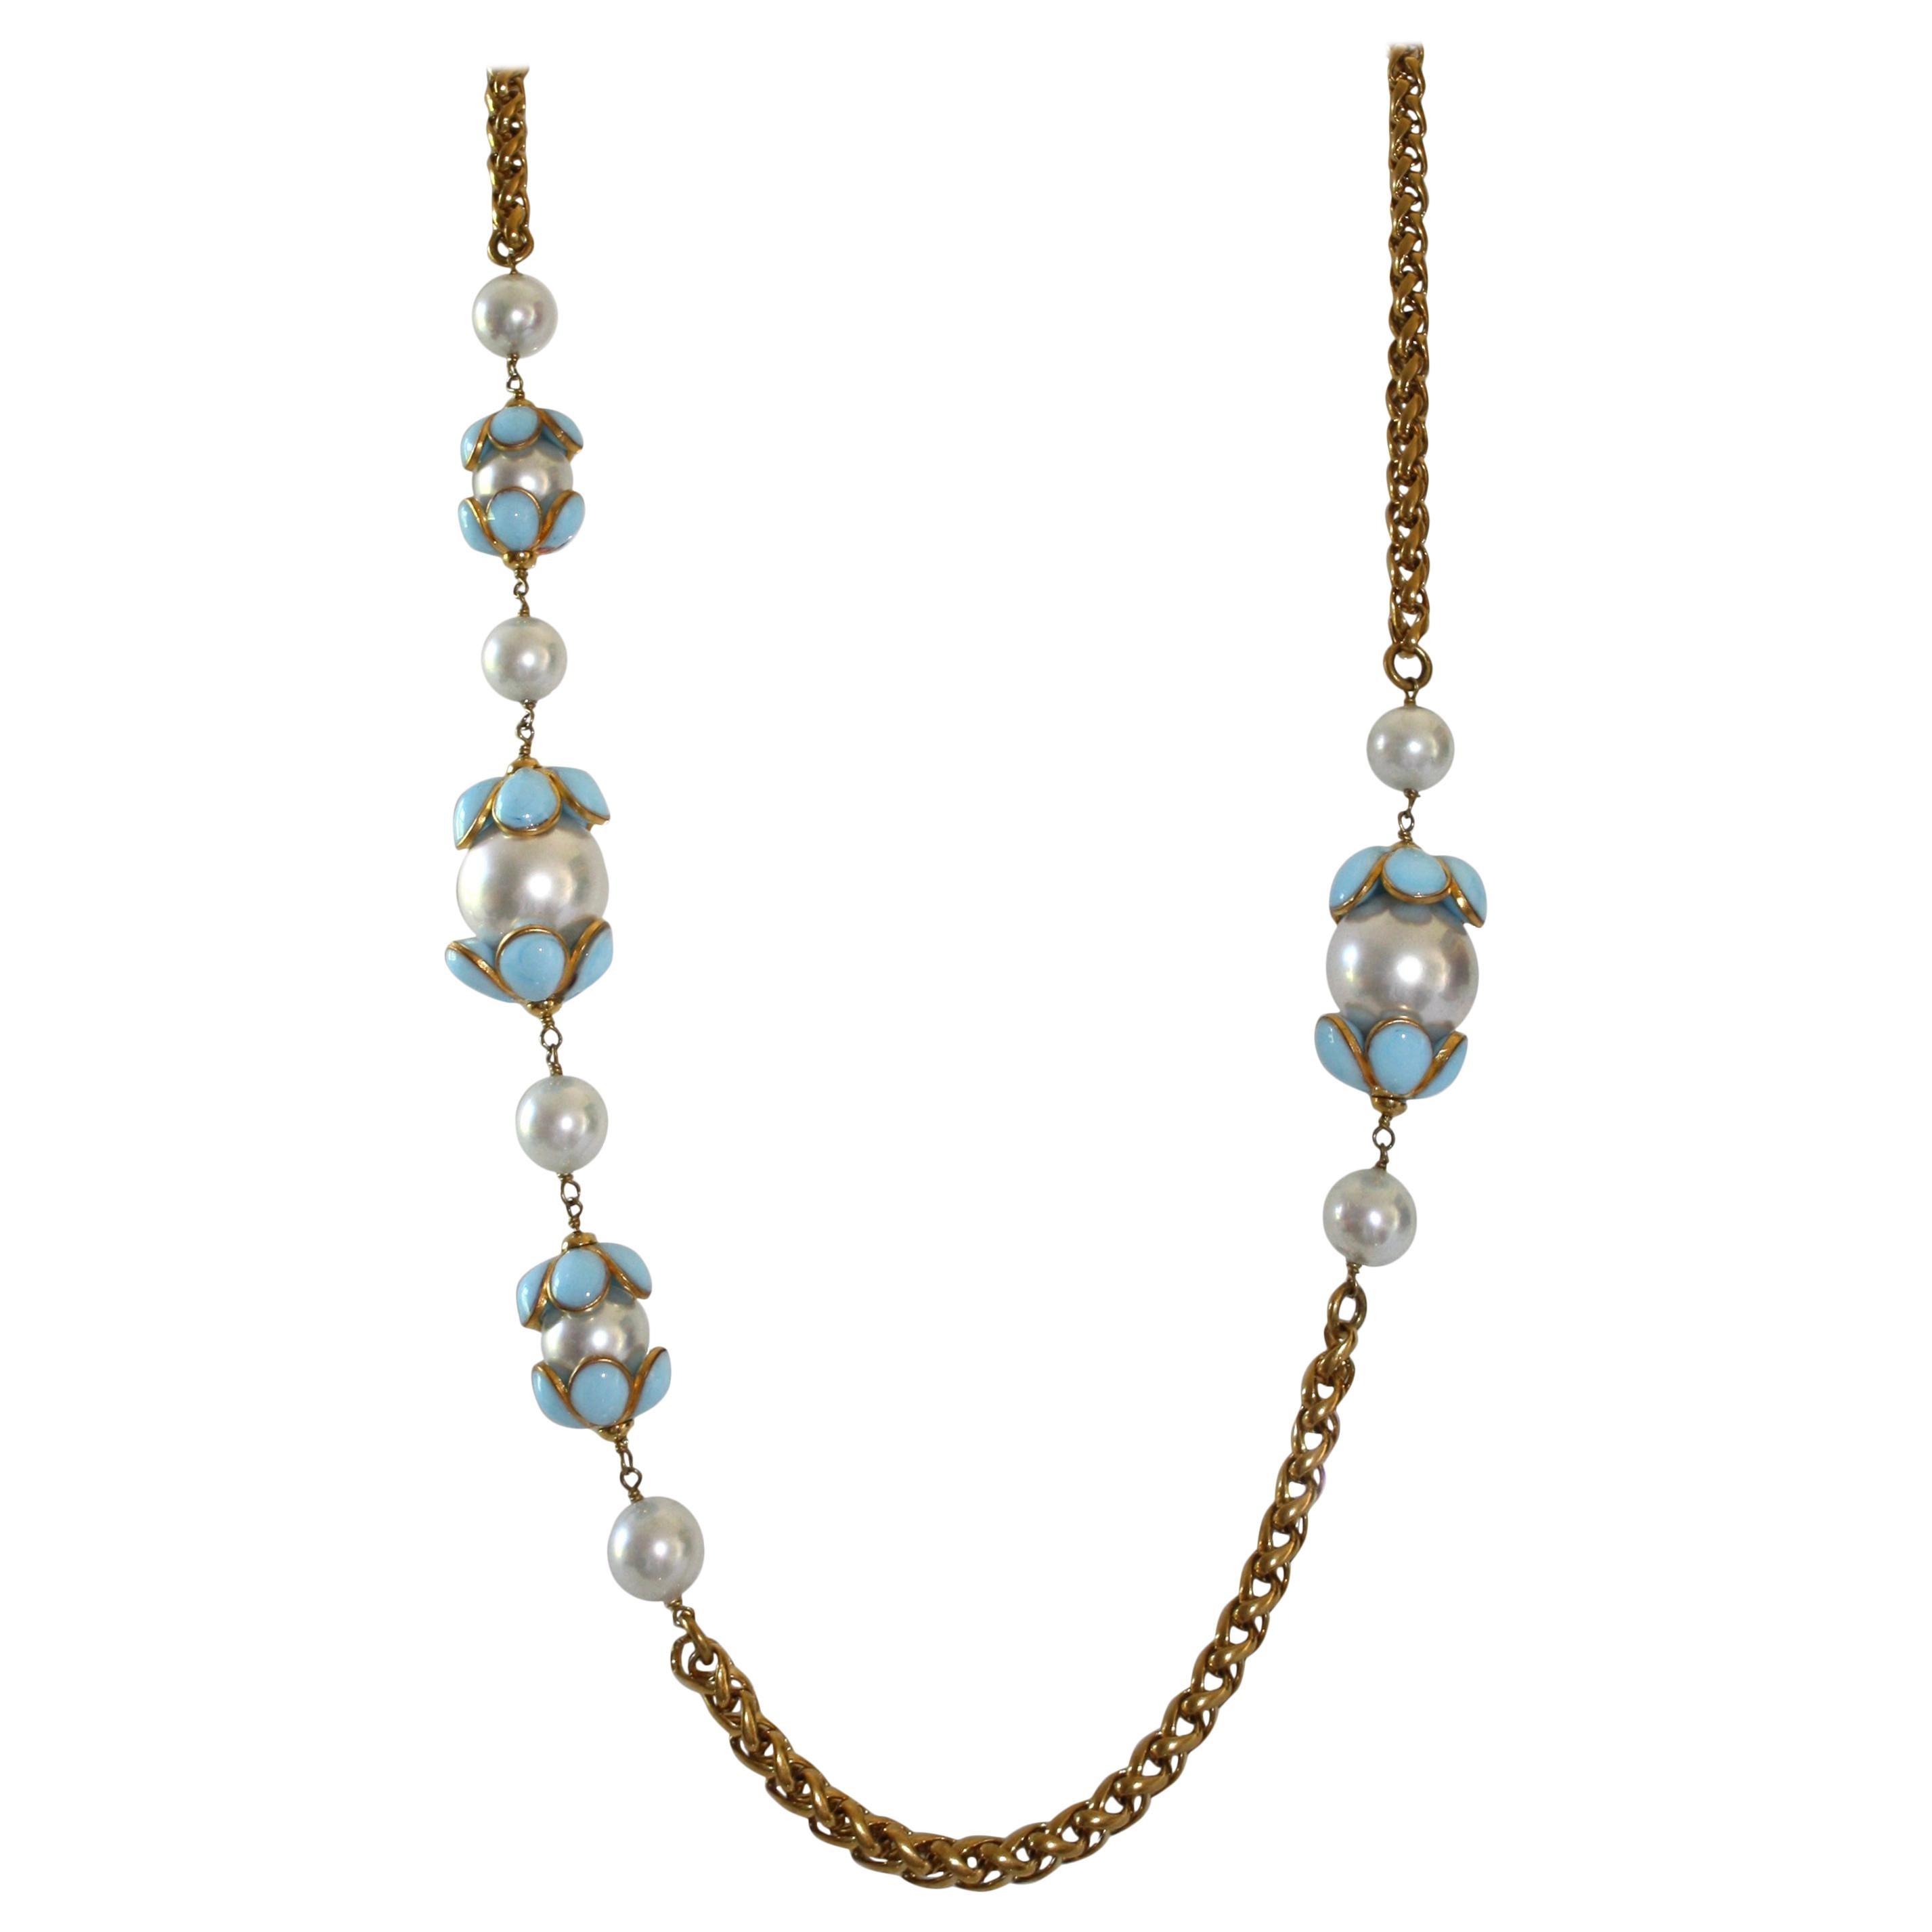 Vintage gold chain sautoir necklace with glass pearls and blue pate de verre glass flowers from Francoise Montague. 